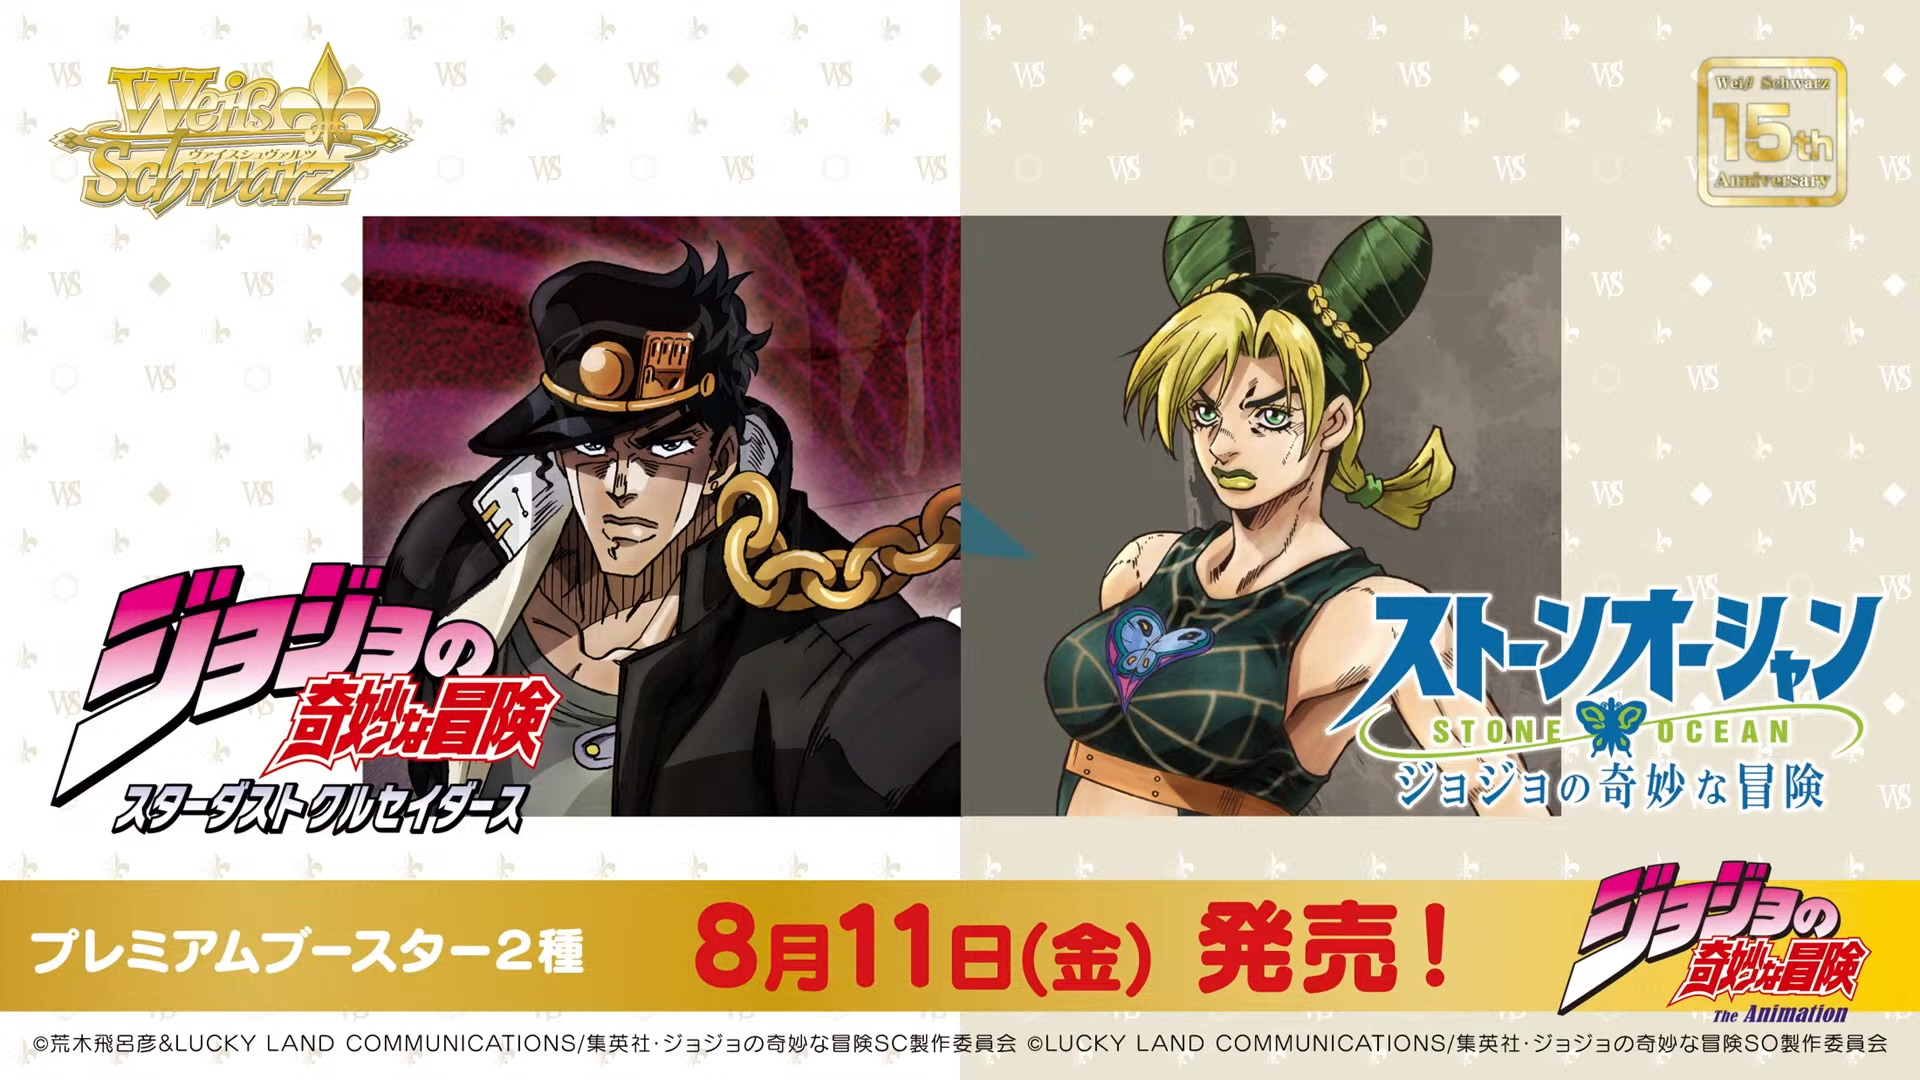 wei-schwarz-announces-stardust-crusaders-and-stone-ocean-cards